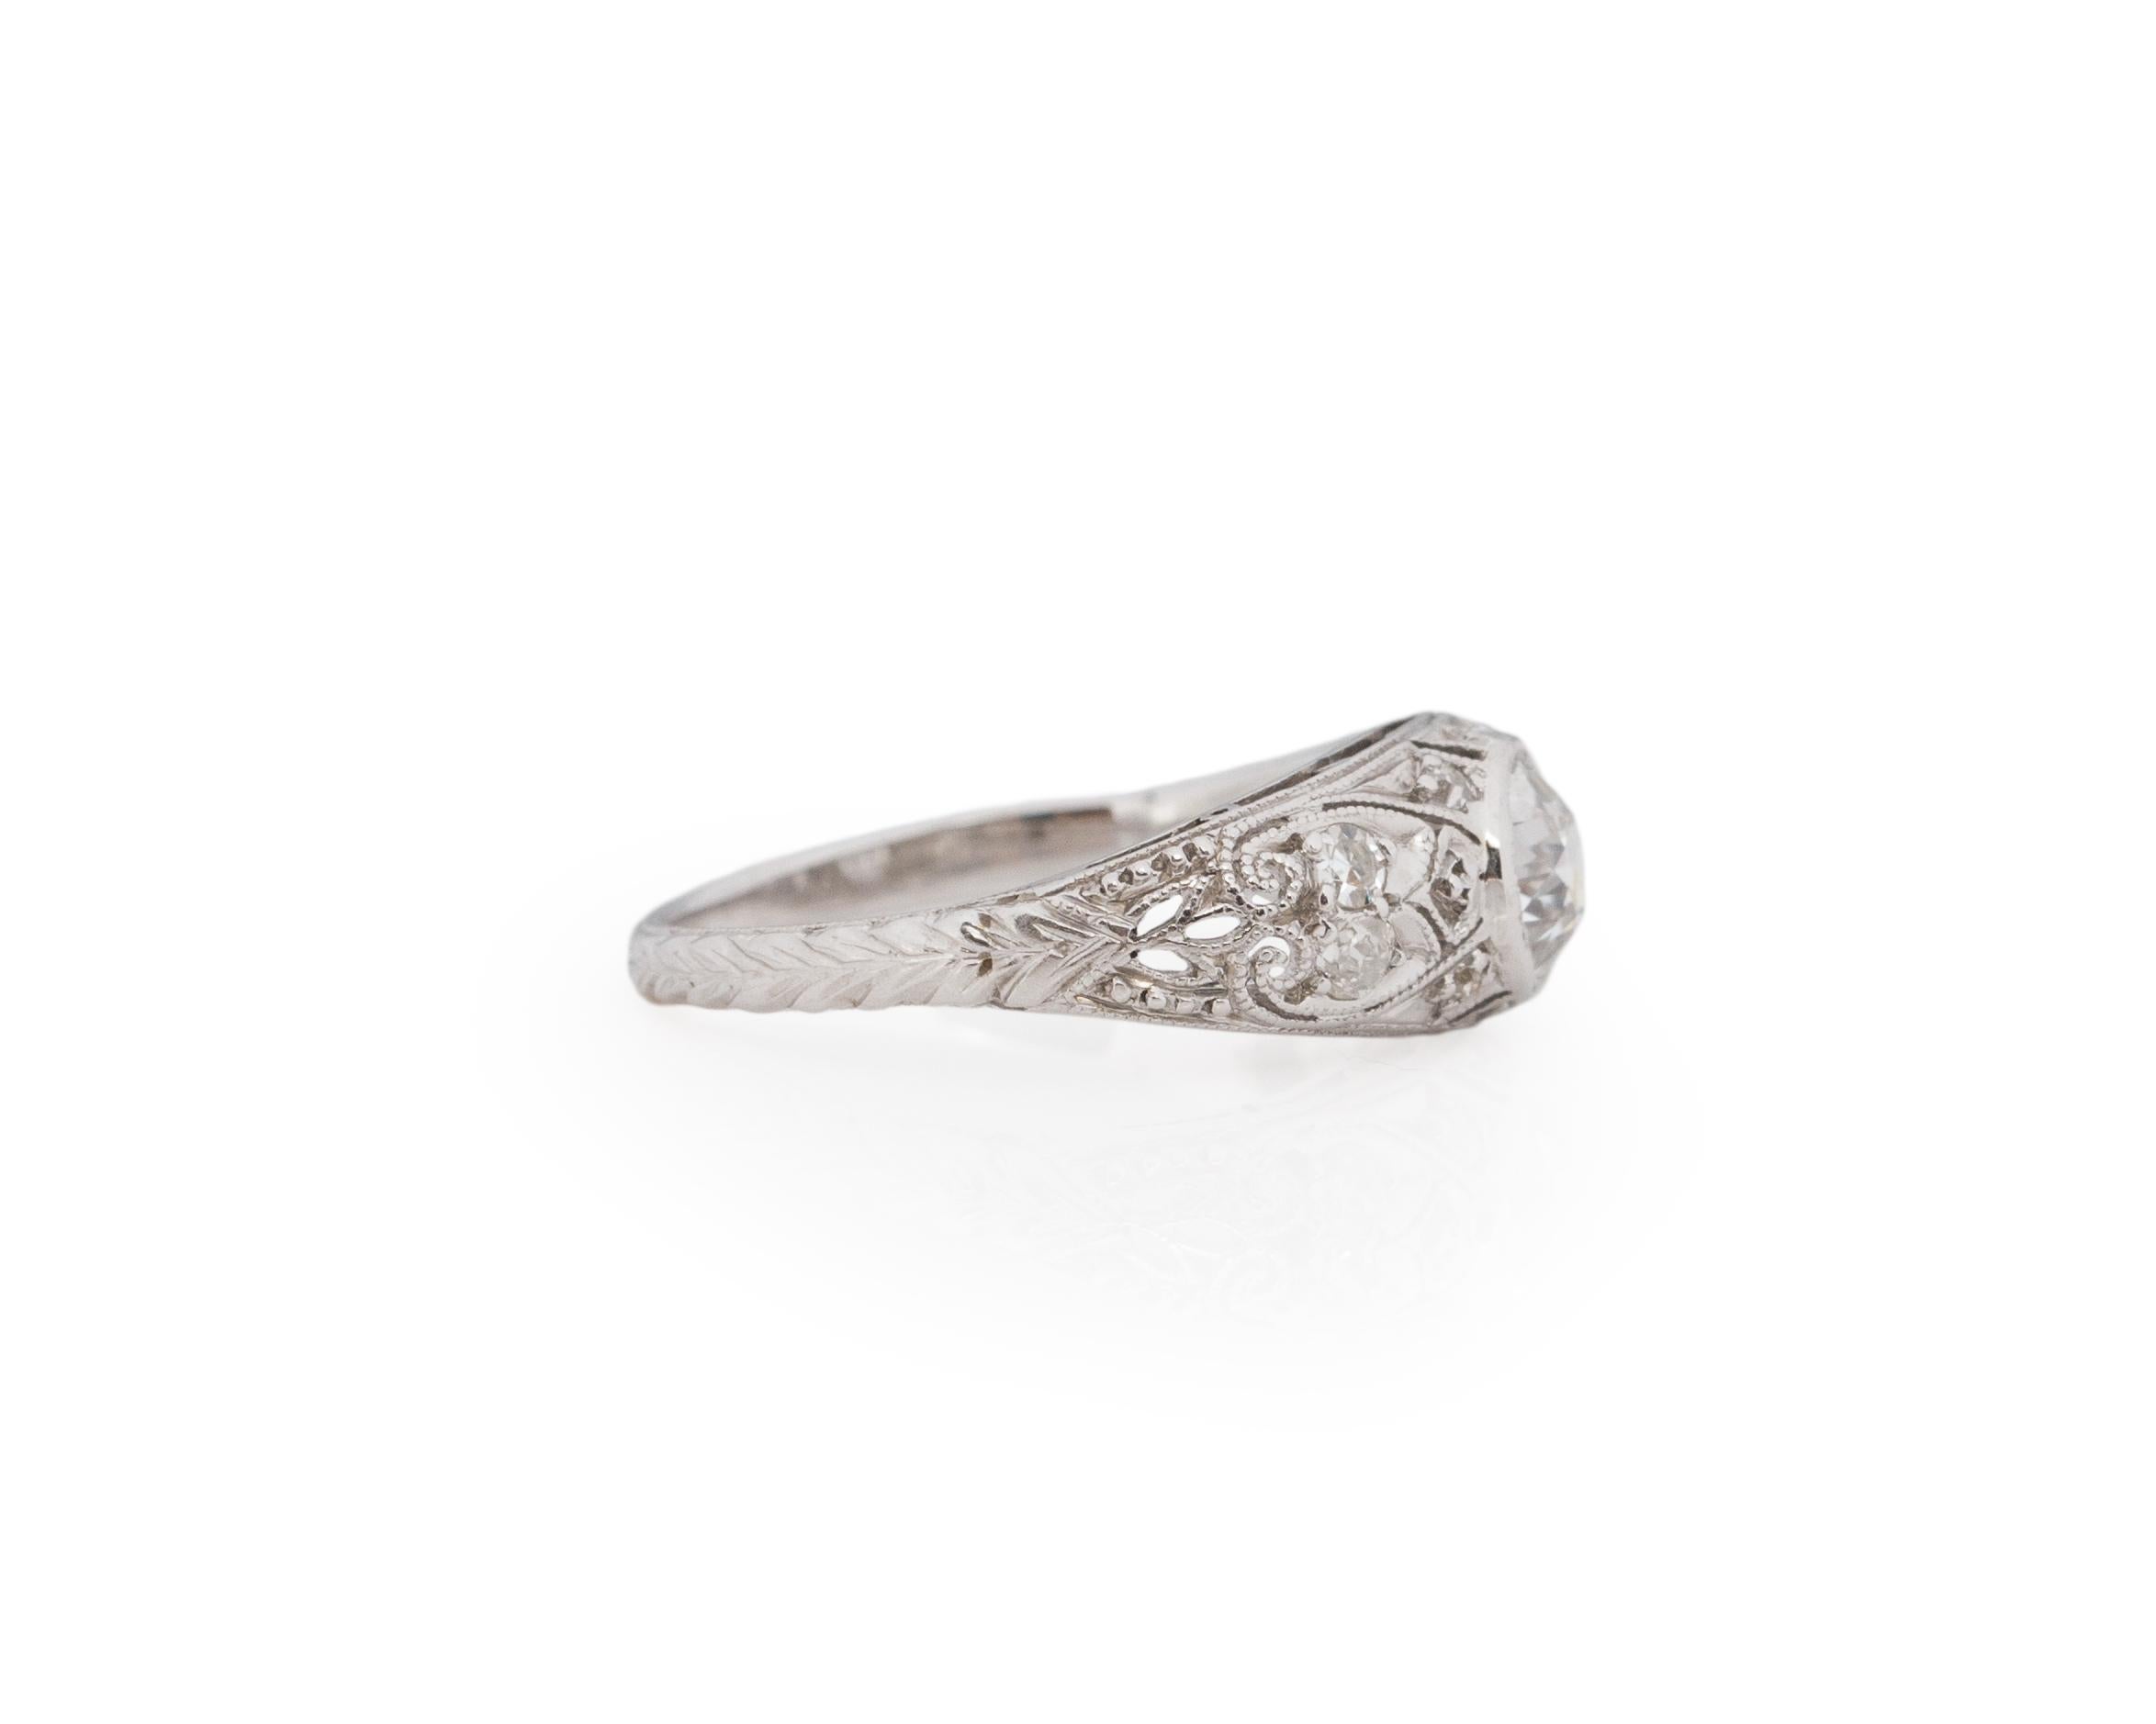 Ring Size: 5.5
Metal Type: Platinum [Hallmarked, and Tested]
Weight: 2.25 grams

Diamond Details:
GIA REPORT #: 6227458002
Weight: .65ct
Cut: Old European brilliant
Color: F
Clarity: SI2
Measurements: 5.37mm x 5.19mm x 3.67mm

Finger to Top of Stone